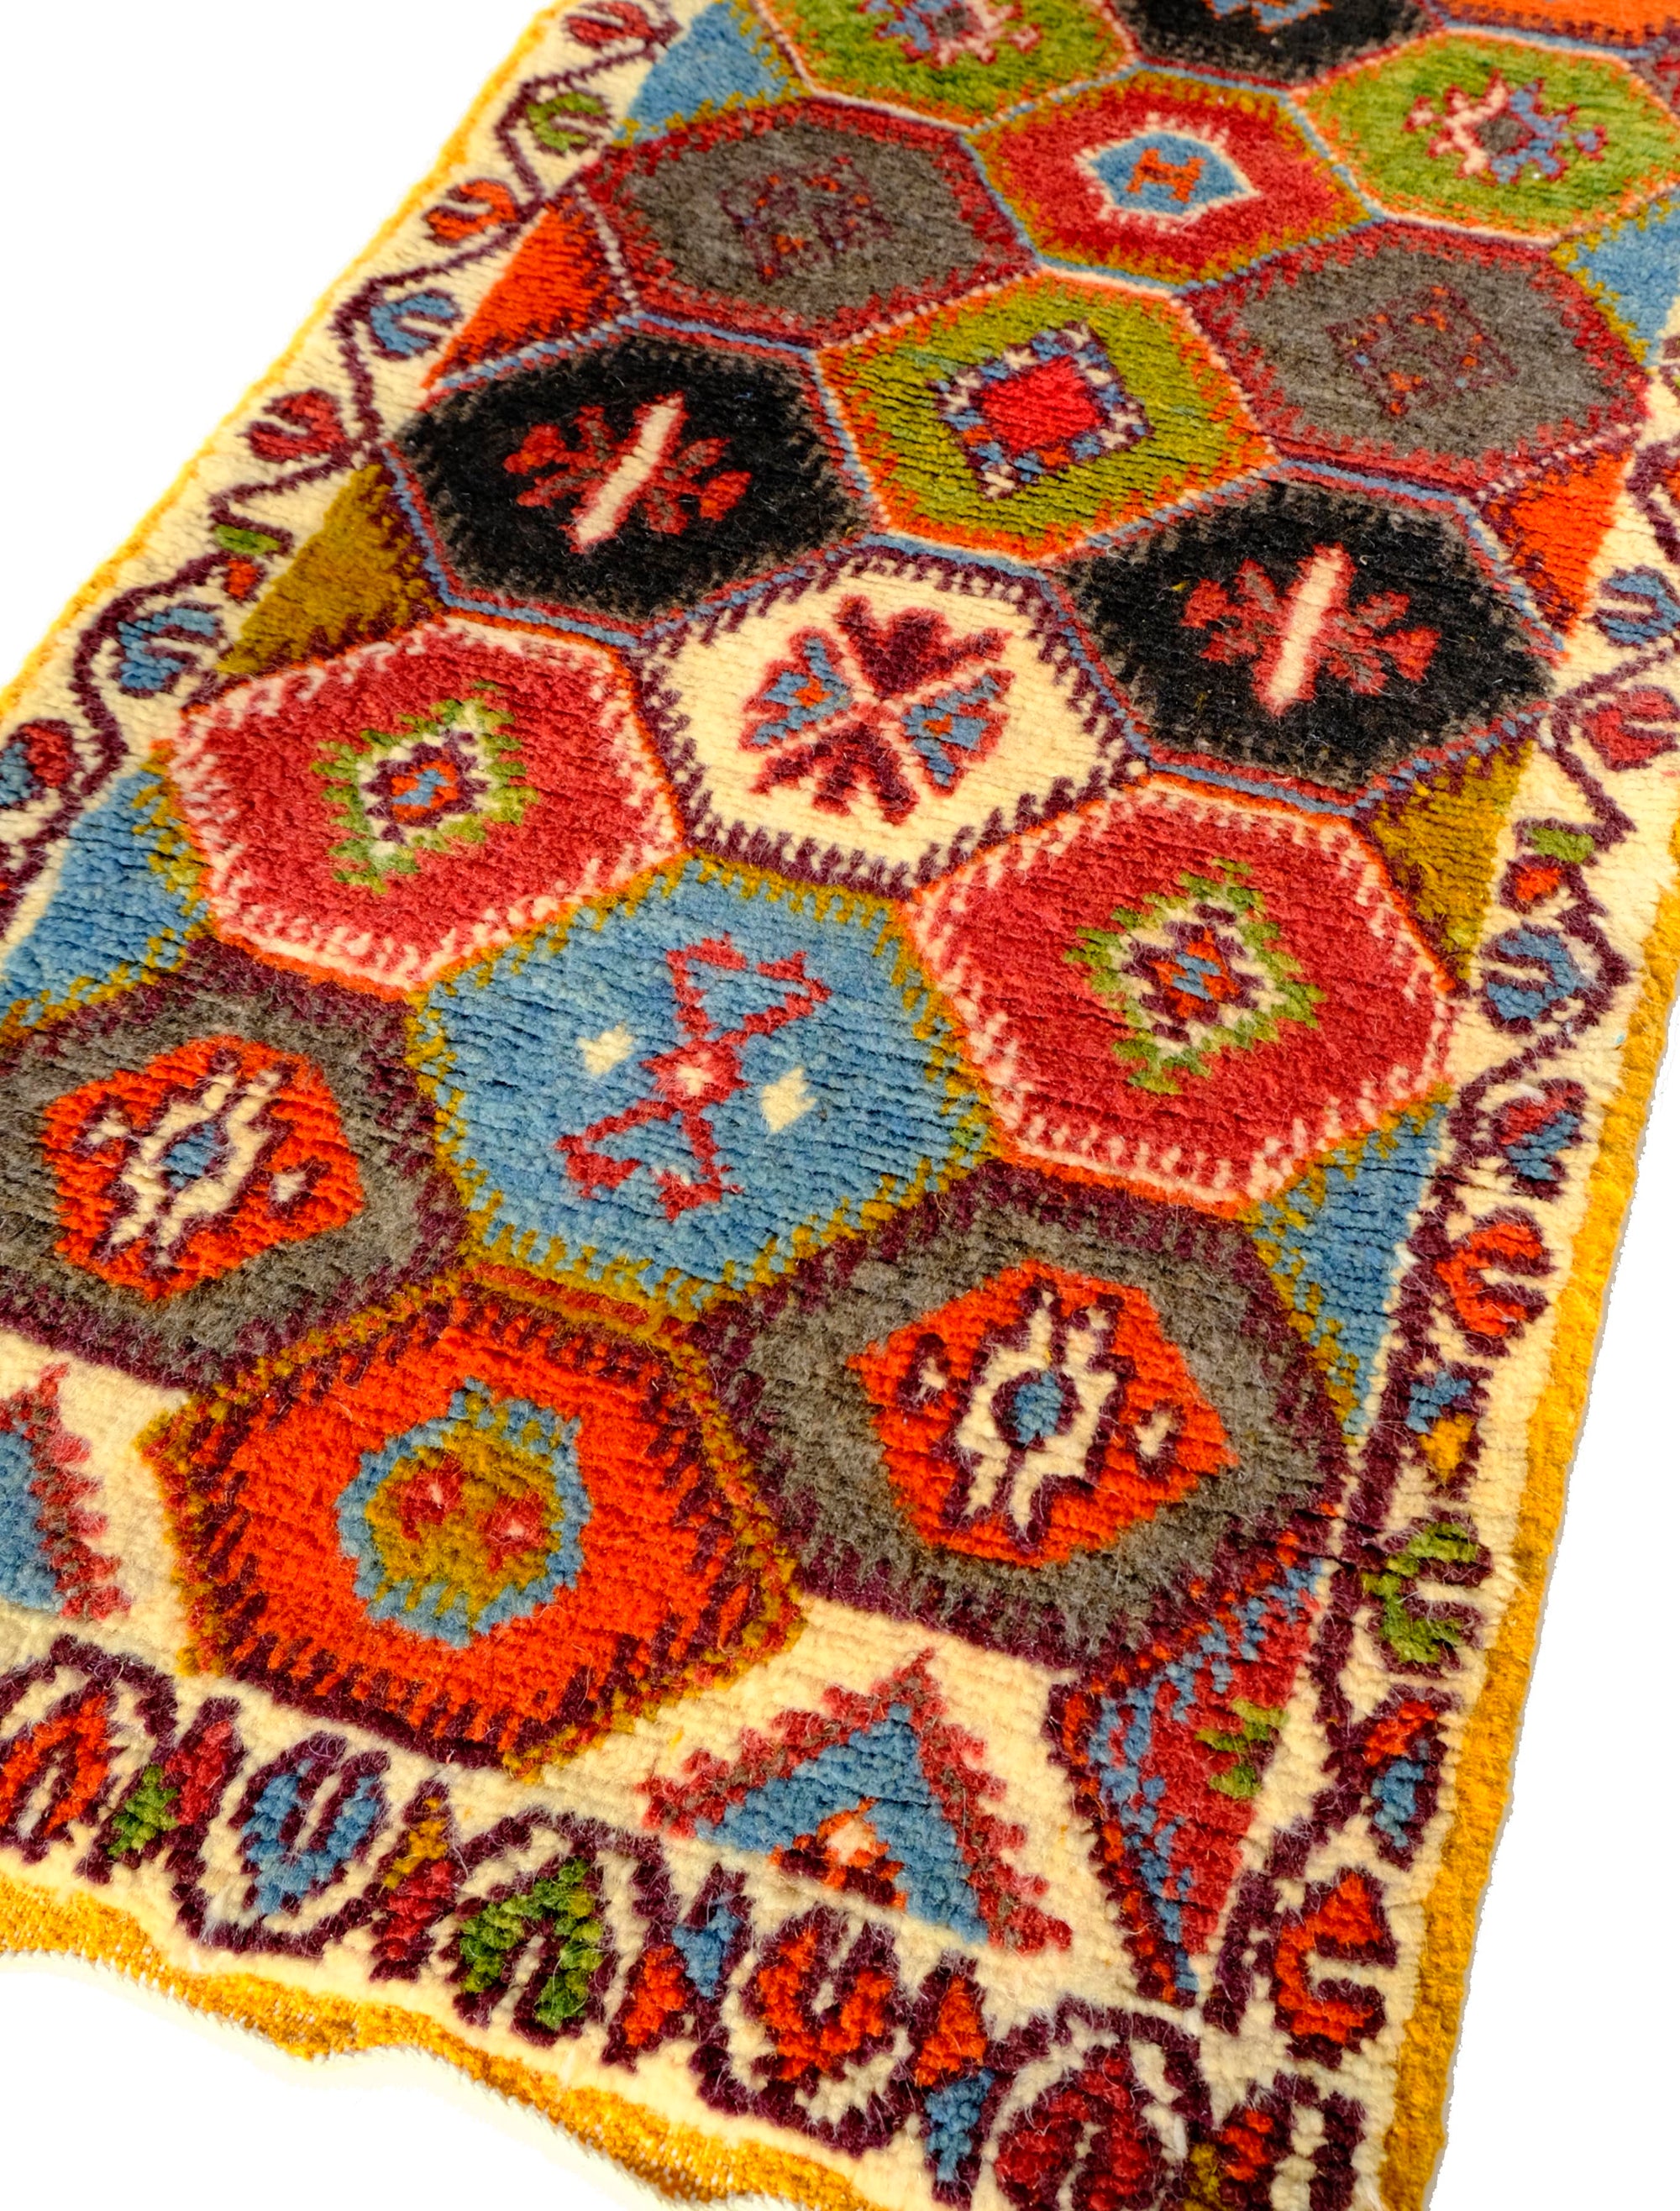 Elevate your space with the Nomad's Embrace Taznakht Rug. This Moroccan-inspired masterpiece boasts a multicolor hexagon pattern, intricately piled up for a textured finish. Traditional yet contemporary, it adds warmth to any room. Bring cultural heritage to your home with this uniquely crafted Taznakht rug.